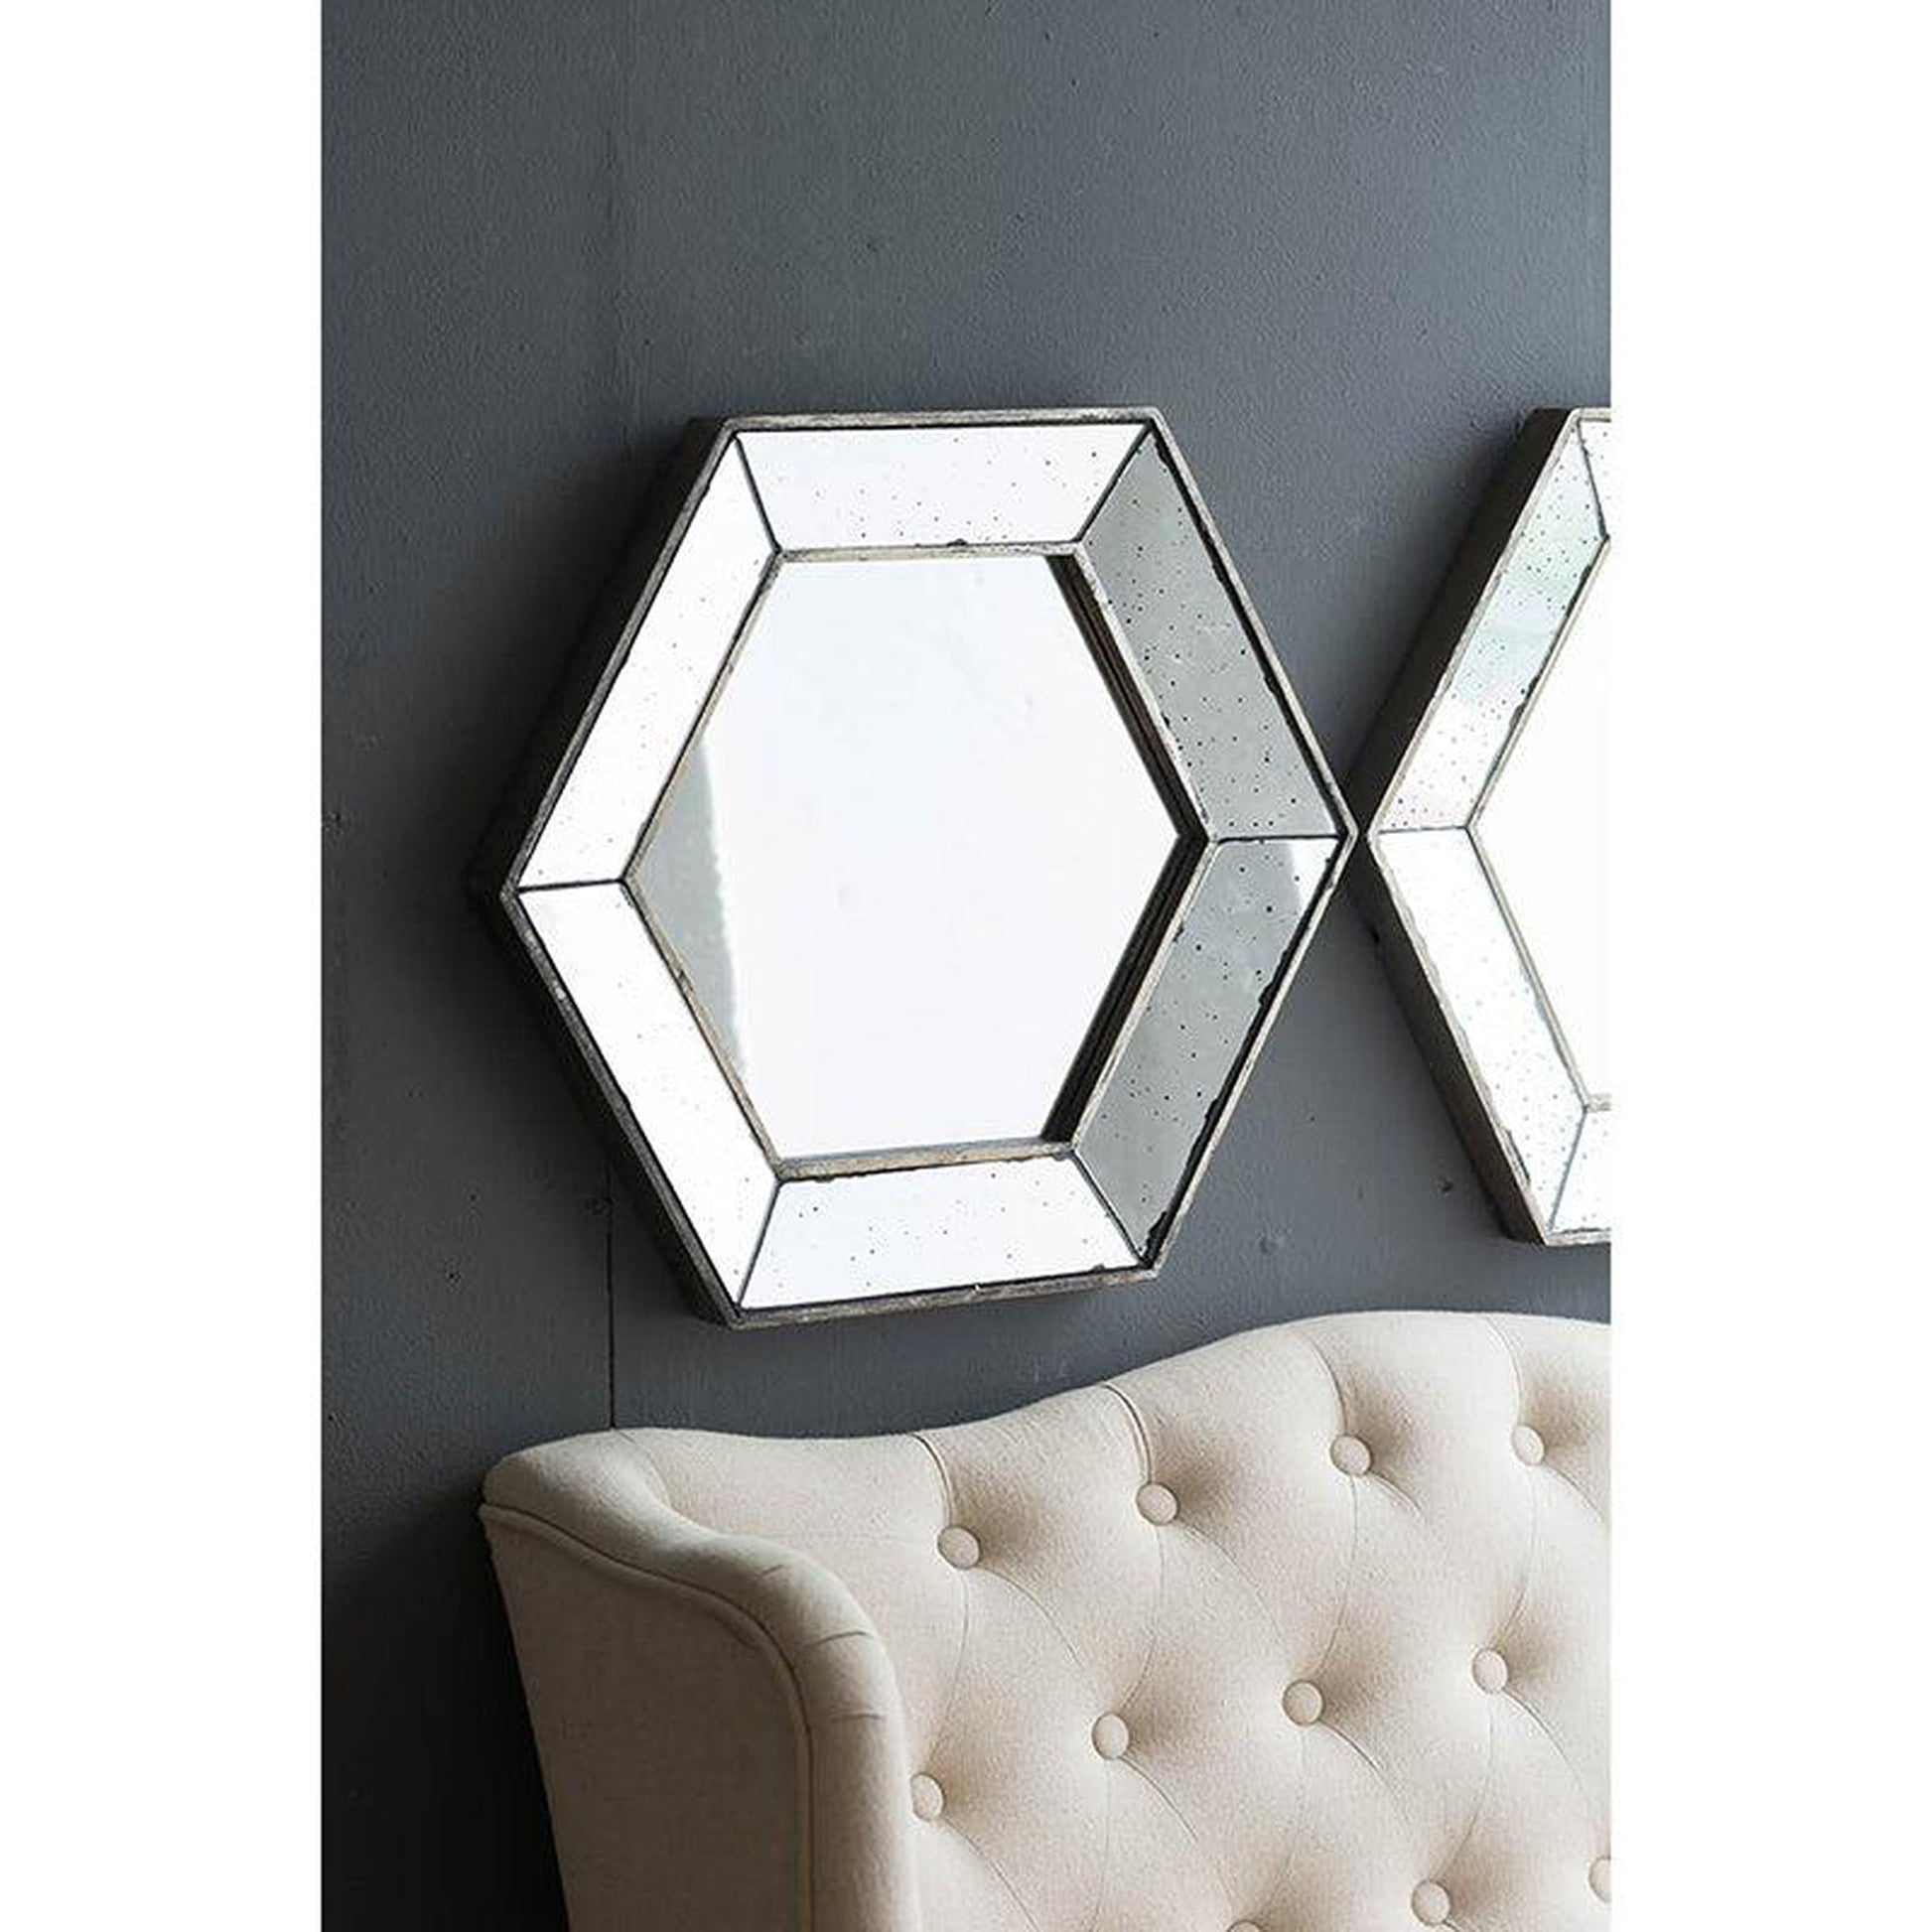 A&B Home 21" x 21" Bundle of 24 Silver Frame Hexagon Shaped Wall-Mounted Mirror